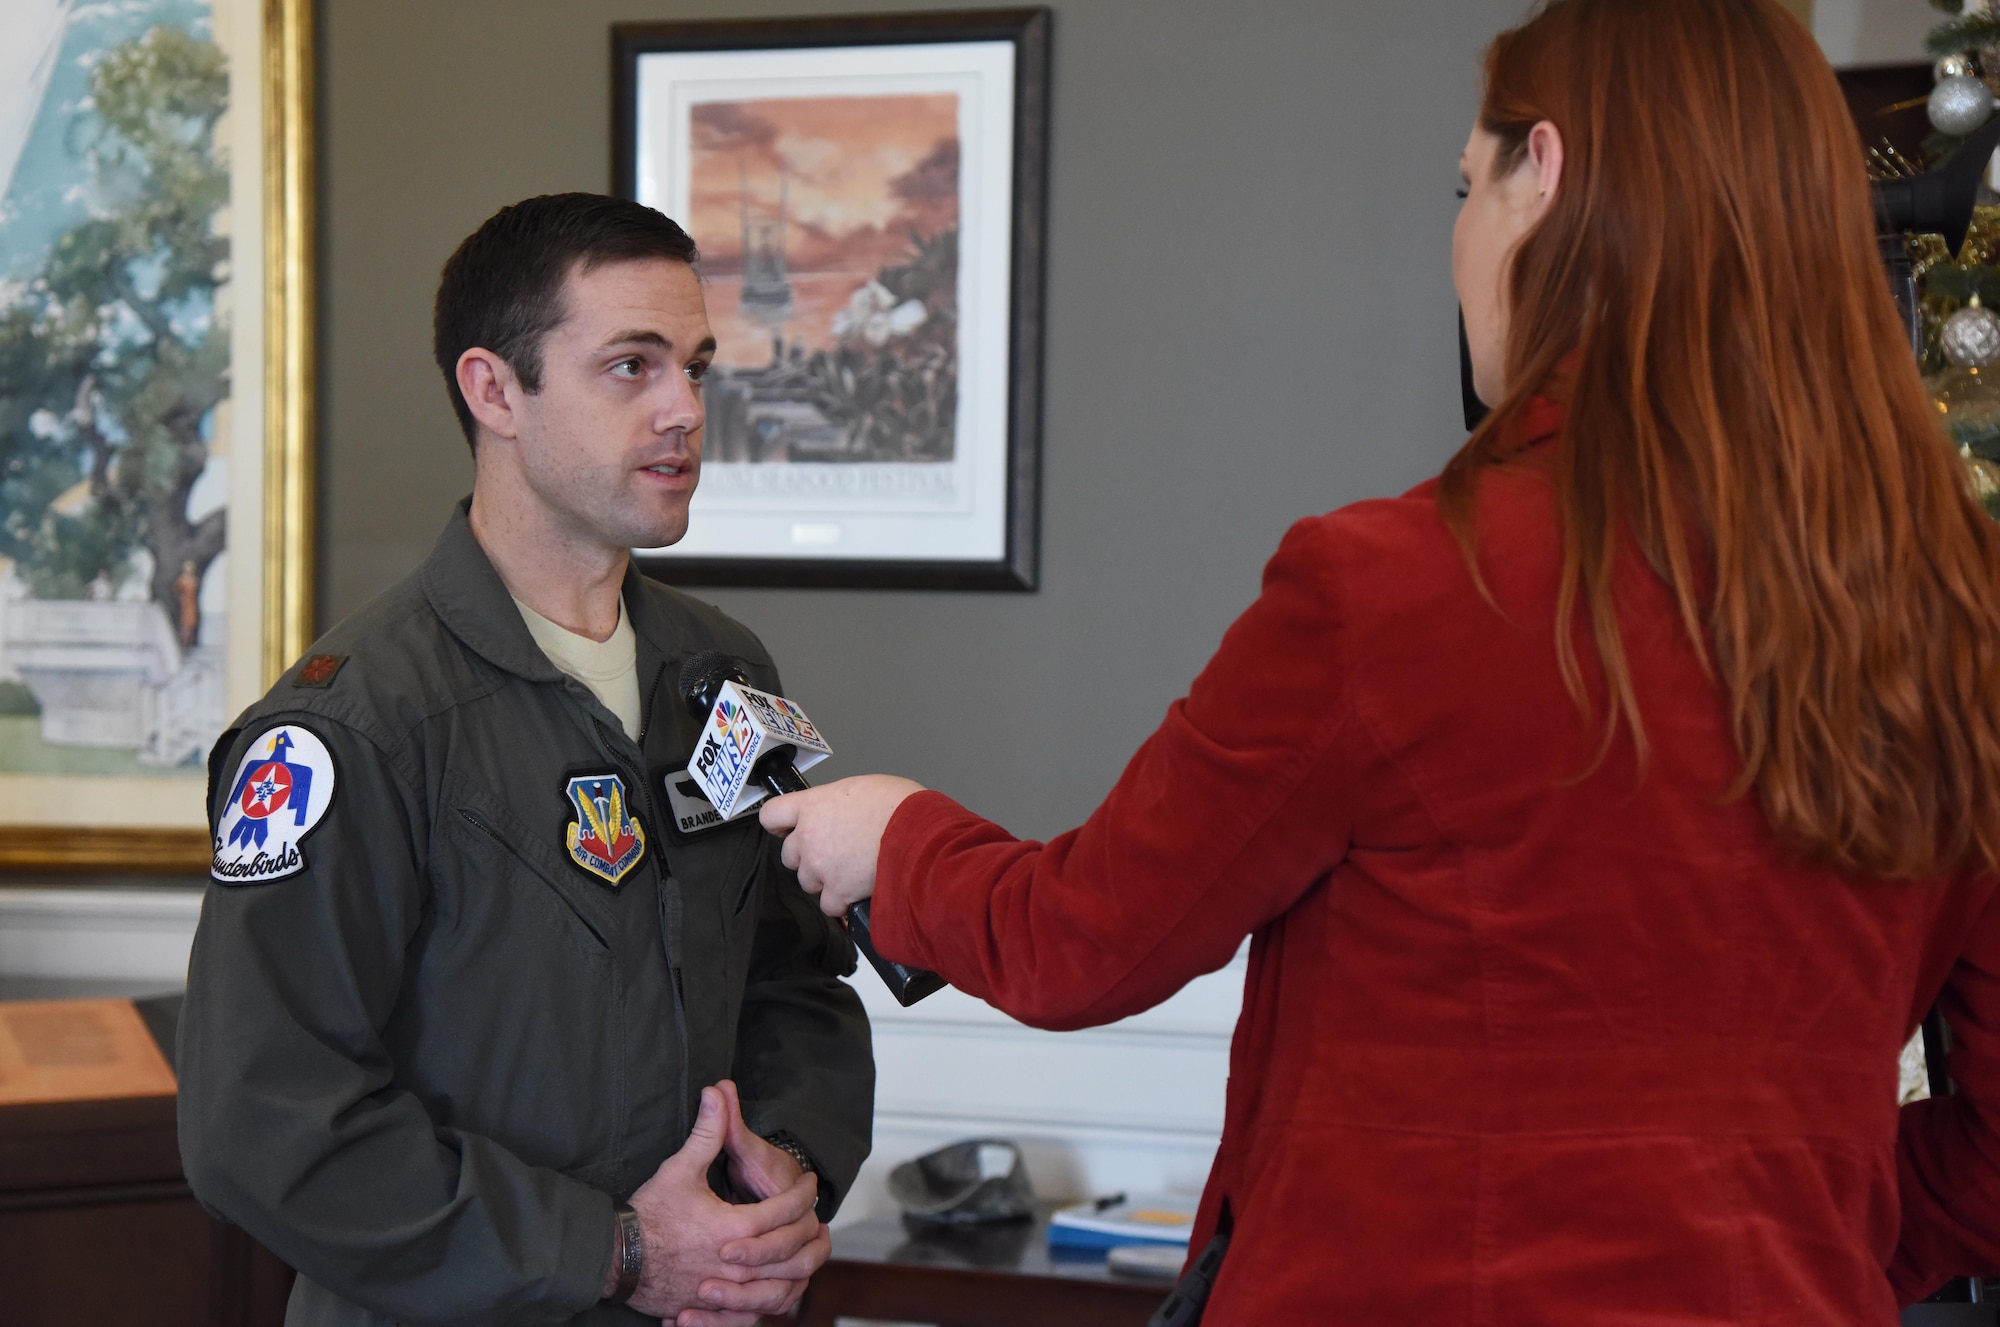 U.S. Air Force Maj. Branden "Ash" Felker, outgoing Thunderbird pilot #8, answers interview questions during a press conference formally announcing Thunder Over the Sound: The Keesler and Biloxi Air and Space Show at the Biloxi Visitors Center, in Biloxi, Mississippi, Dec. 18, 2018. Felker was joined by Keesler and Biloxi leadership at the press conference which reviewed and confirmed information and acts for the air show and allowed attendees to meet with and ask questions of all speakers. (U.S. Air Force photo by Kemberly Groue)